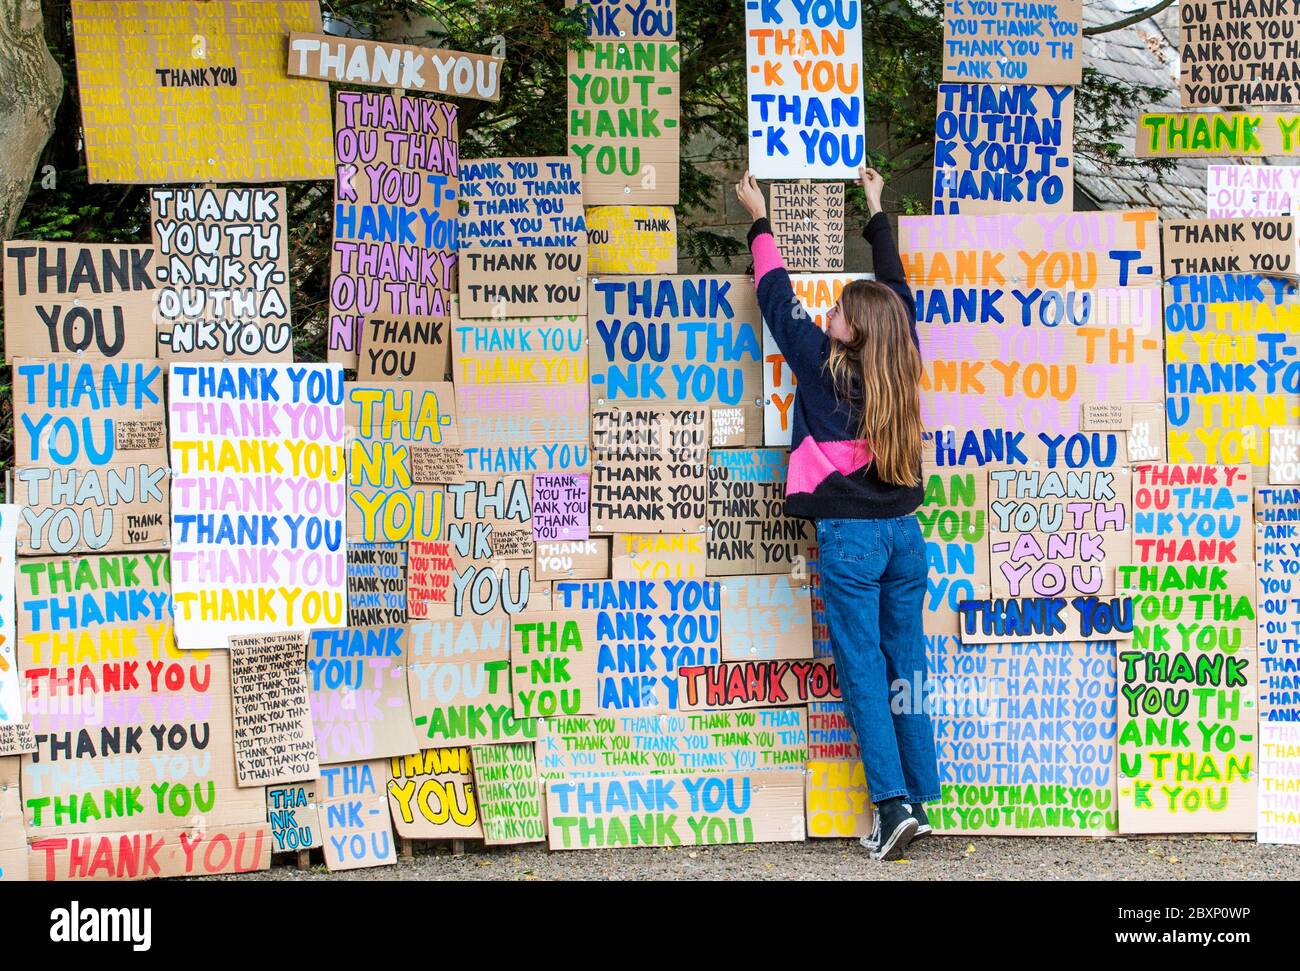 Hermione Wilson helps to install a new artwork at Jupiter Artland, Edinburgh, created as a tribute to the NHS titled 'A Thousand Thank Yous' originally devised by the late Allan Kaprow which consists of colourful painted messages on cardboard and has been directed remotely by London-based artist Peter Liversidge. Stock Photo